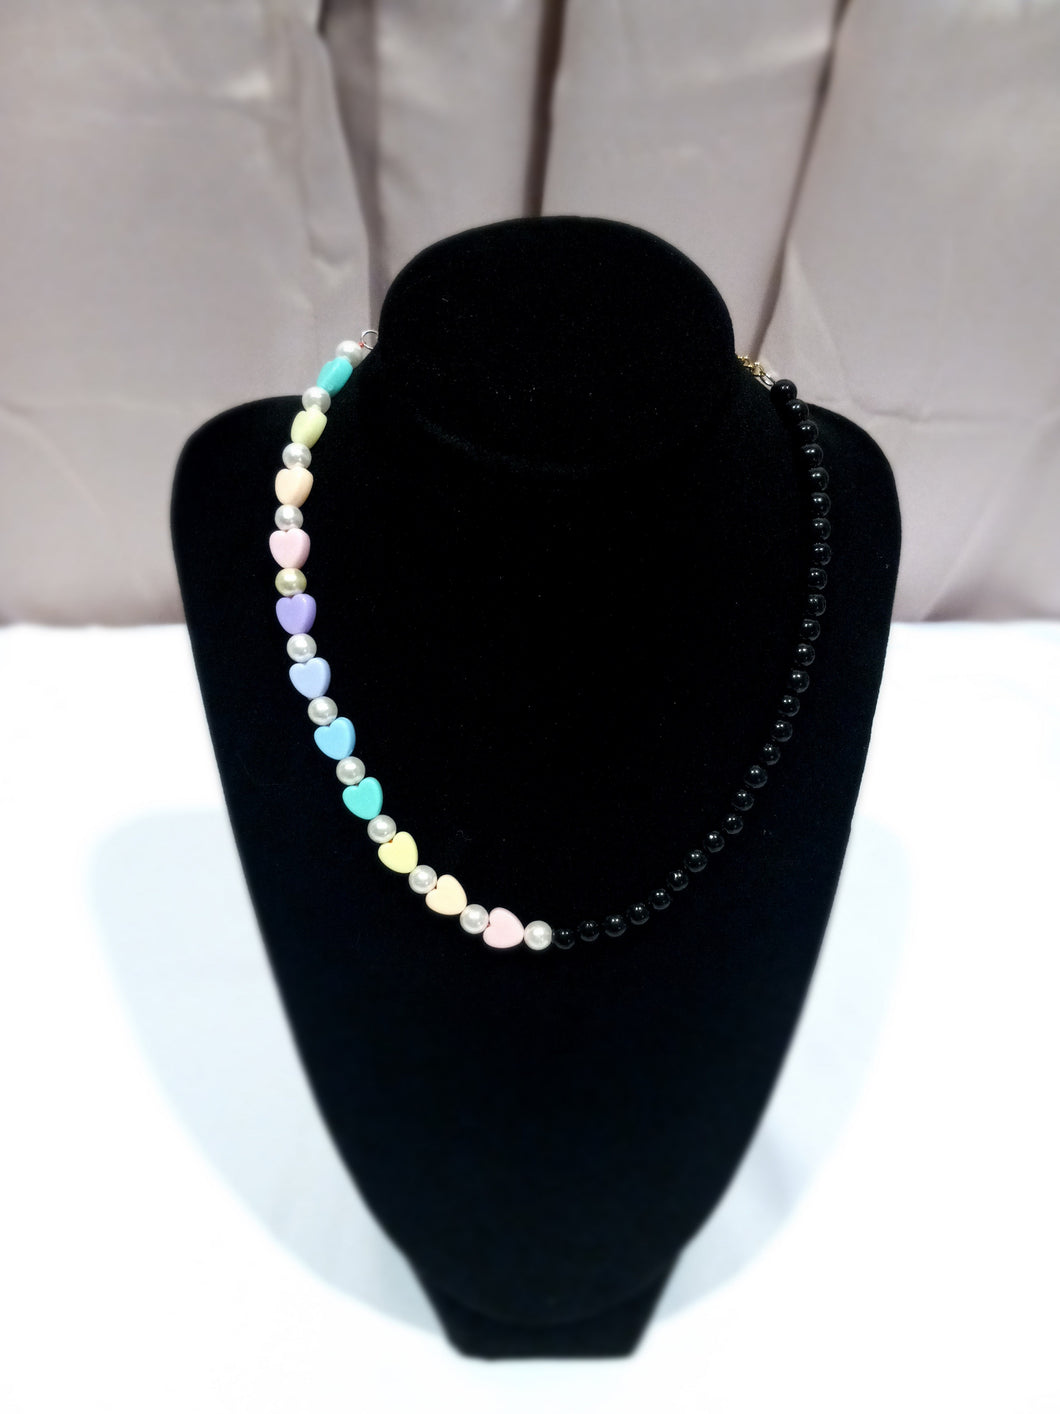 Rainbow Hearts with Pearls and Black Beads - Half & Half Necklace